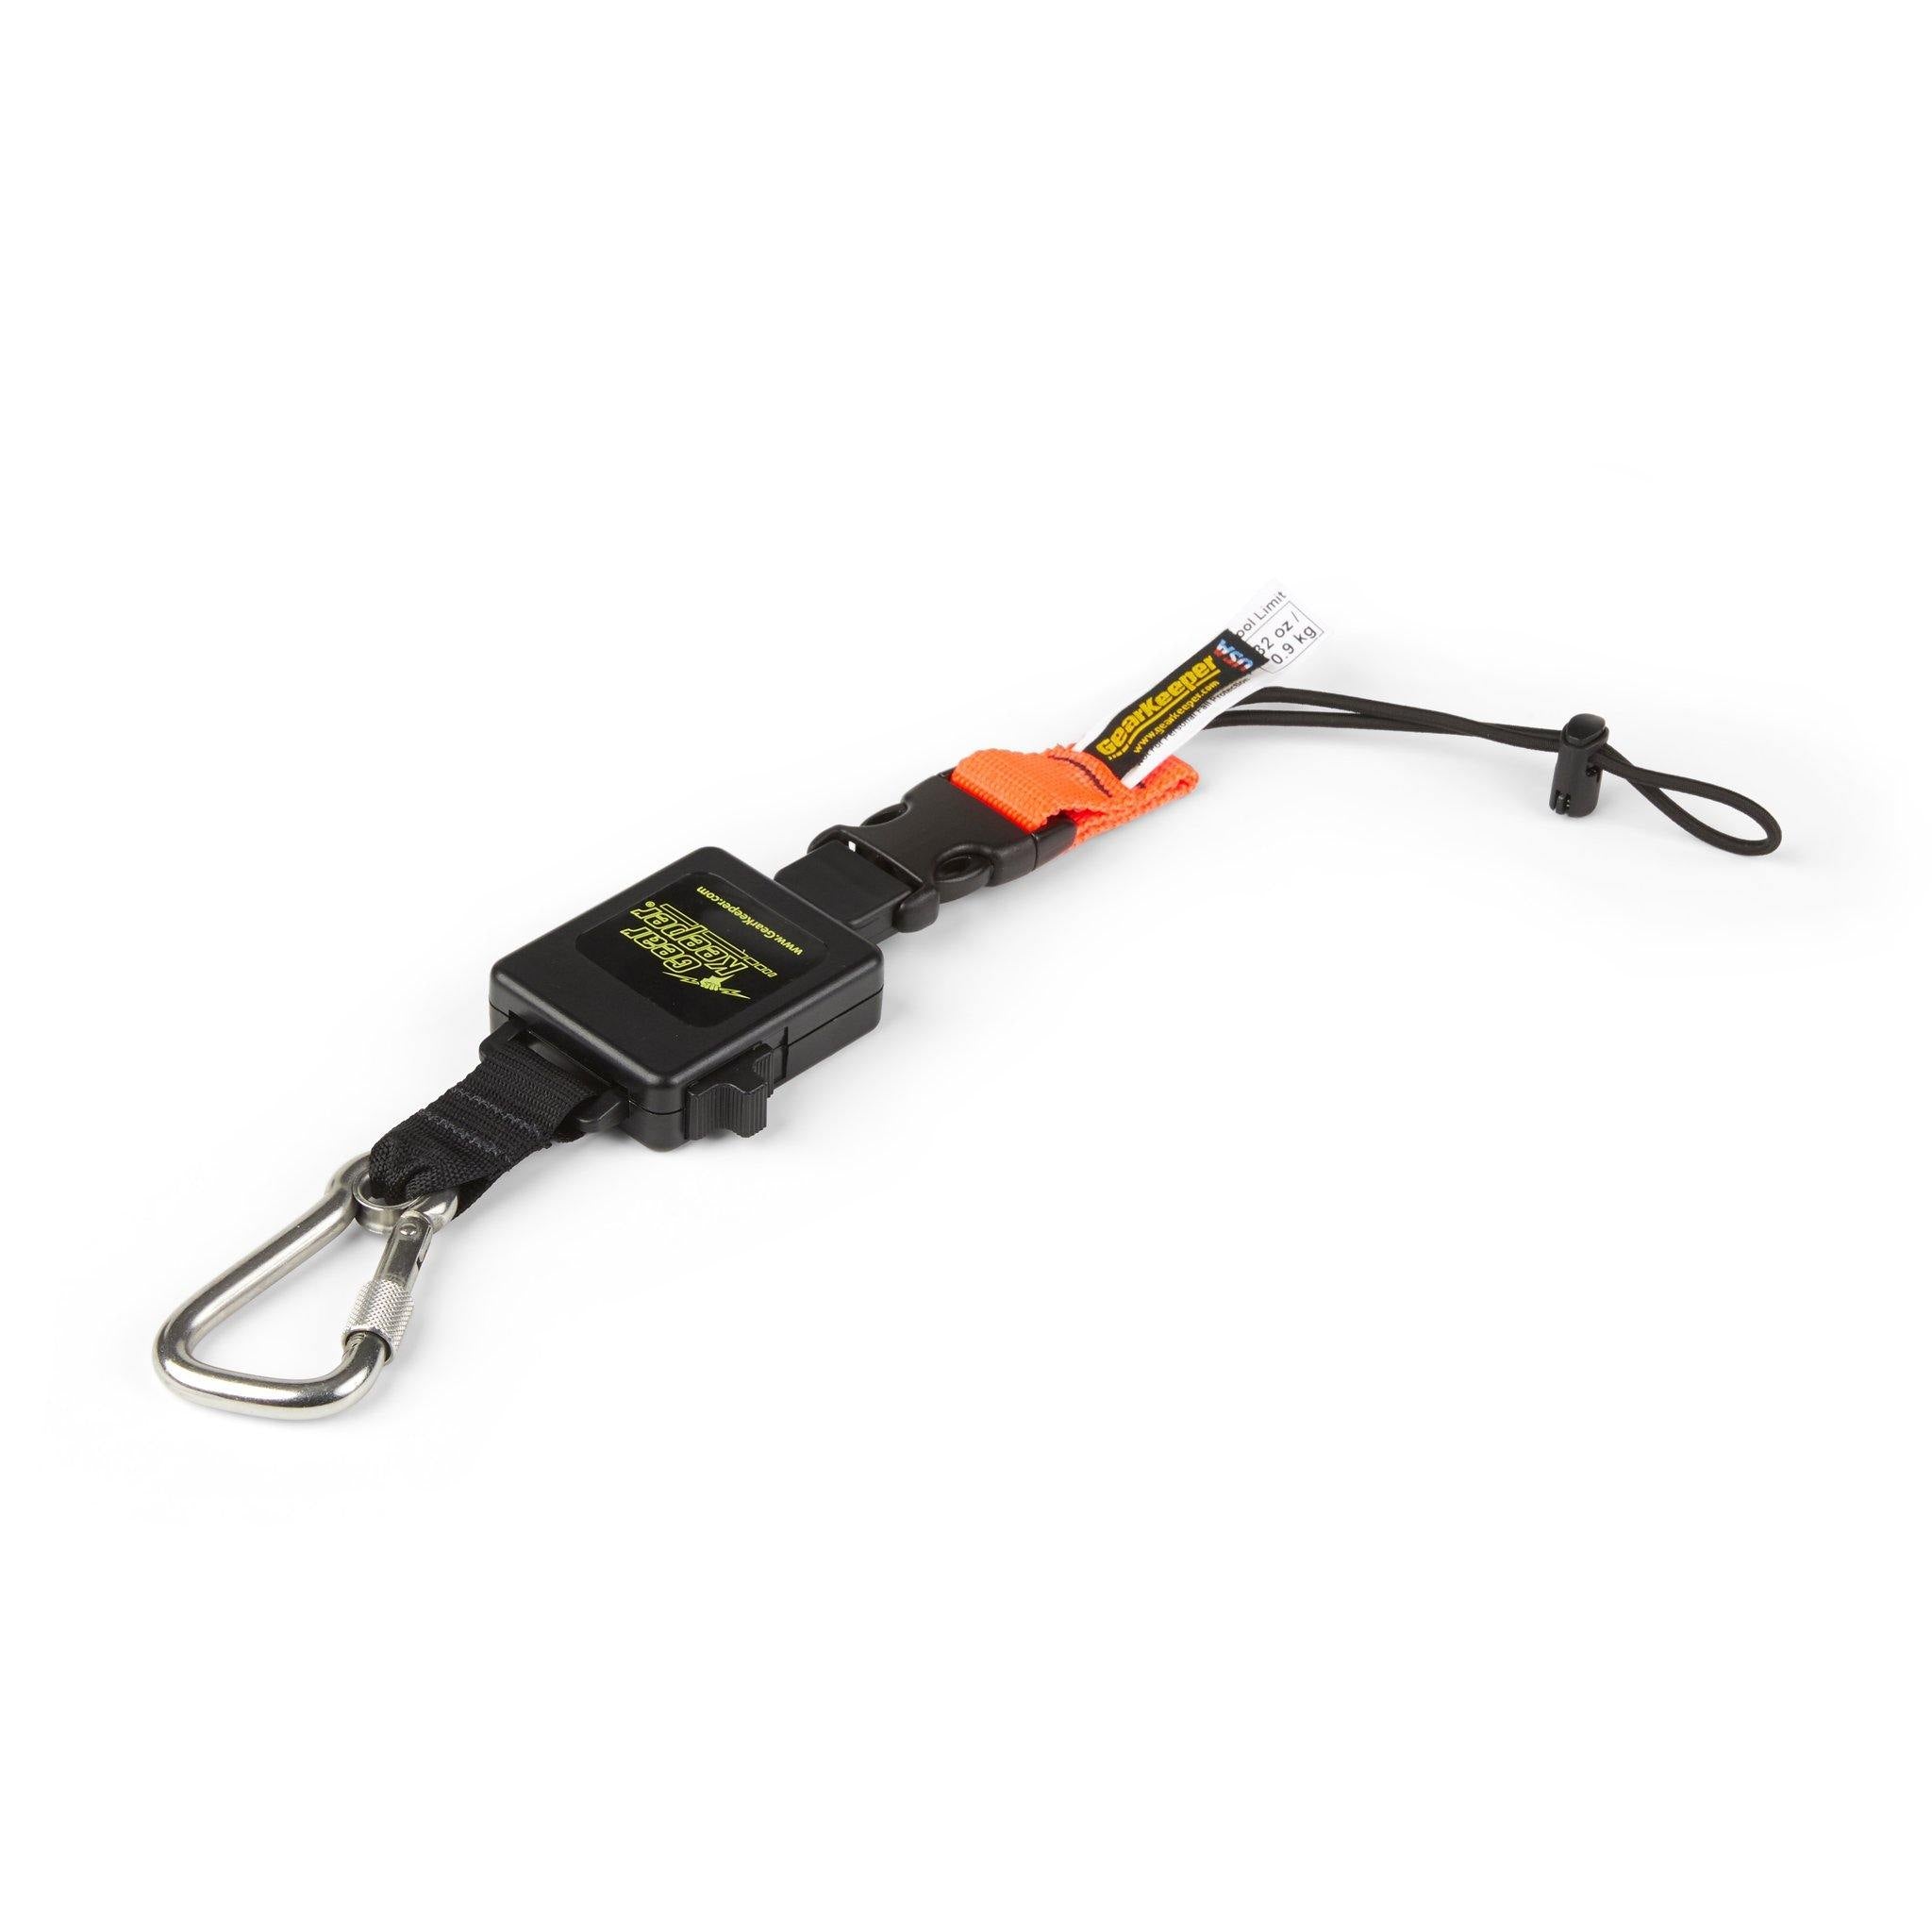 Retractable Gear Keeper Tether With Lock - 0.9kg | 2.0lbs - GRIPPS Global